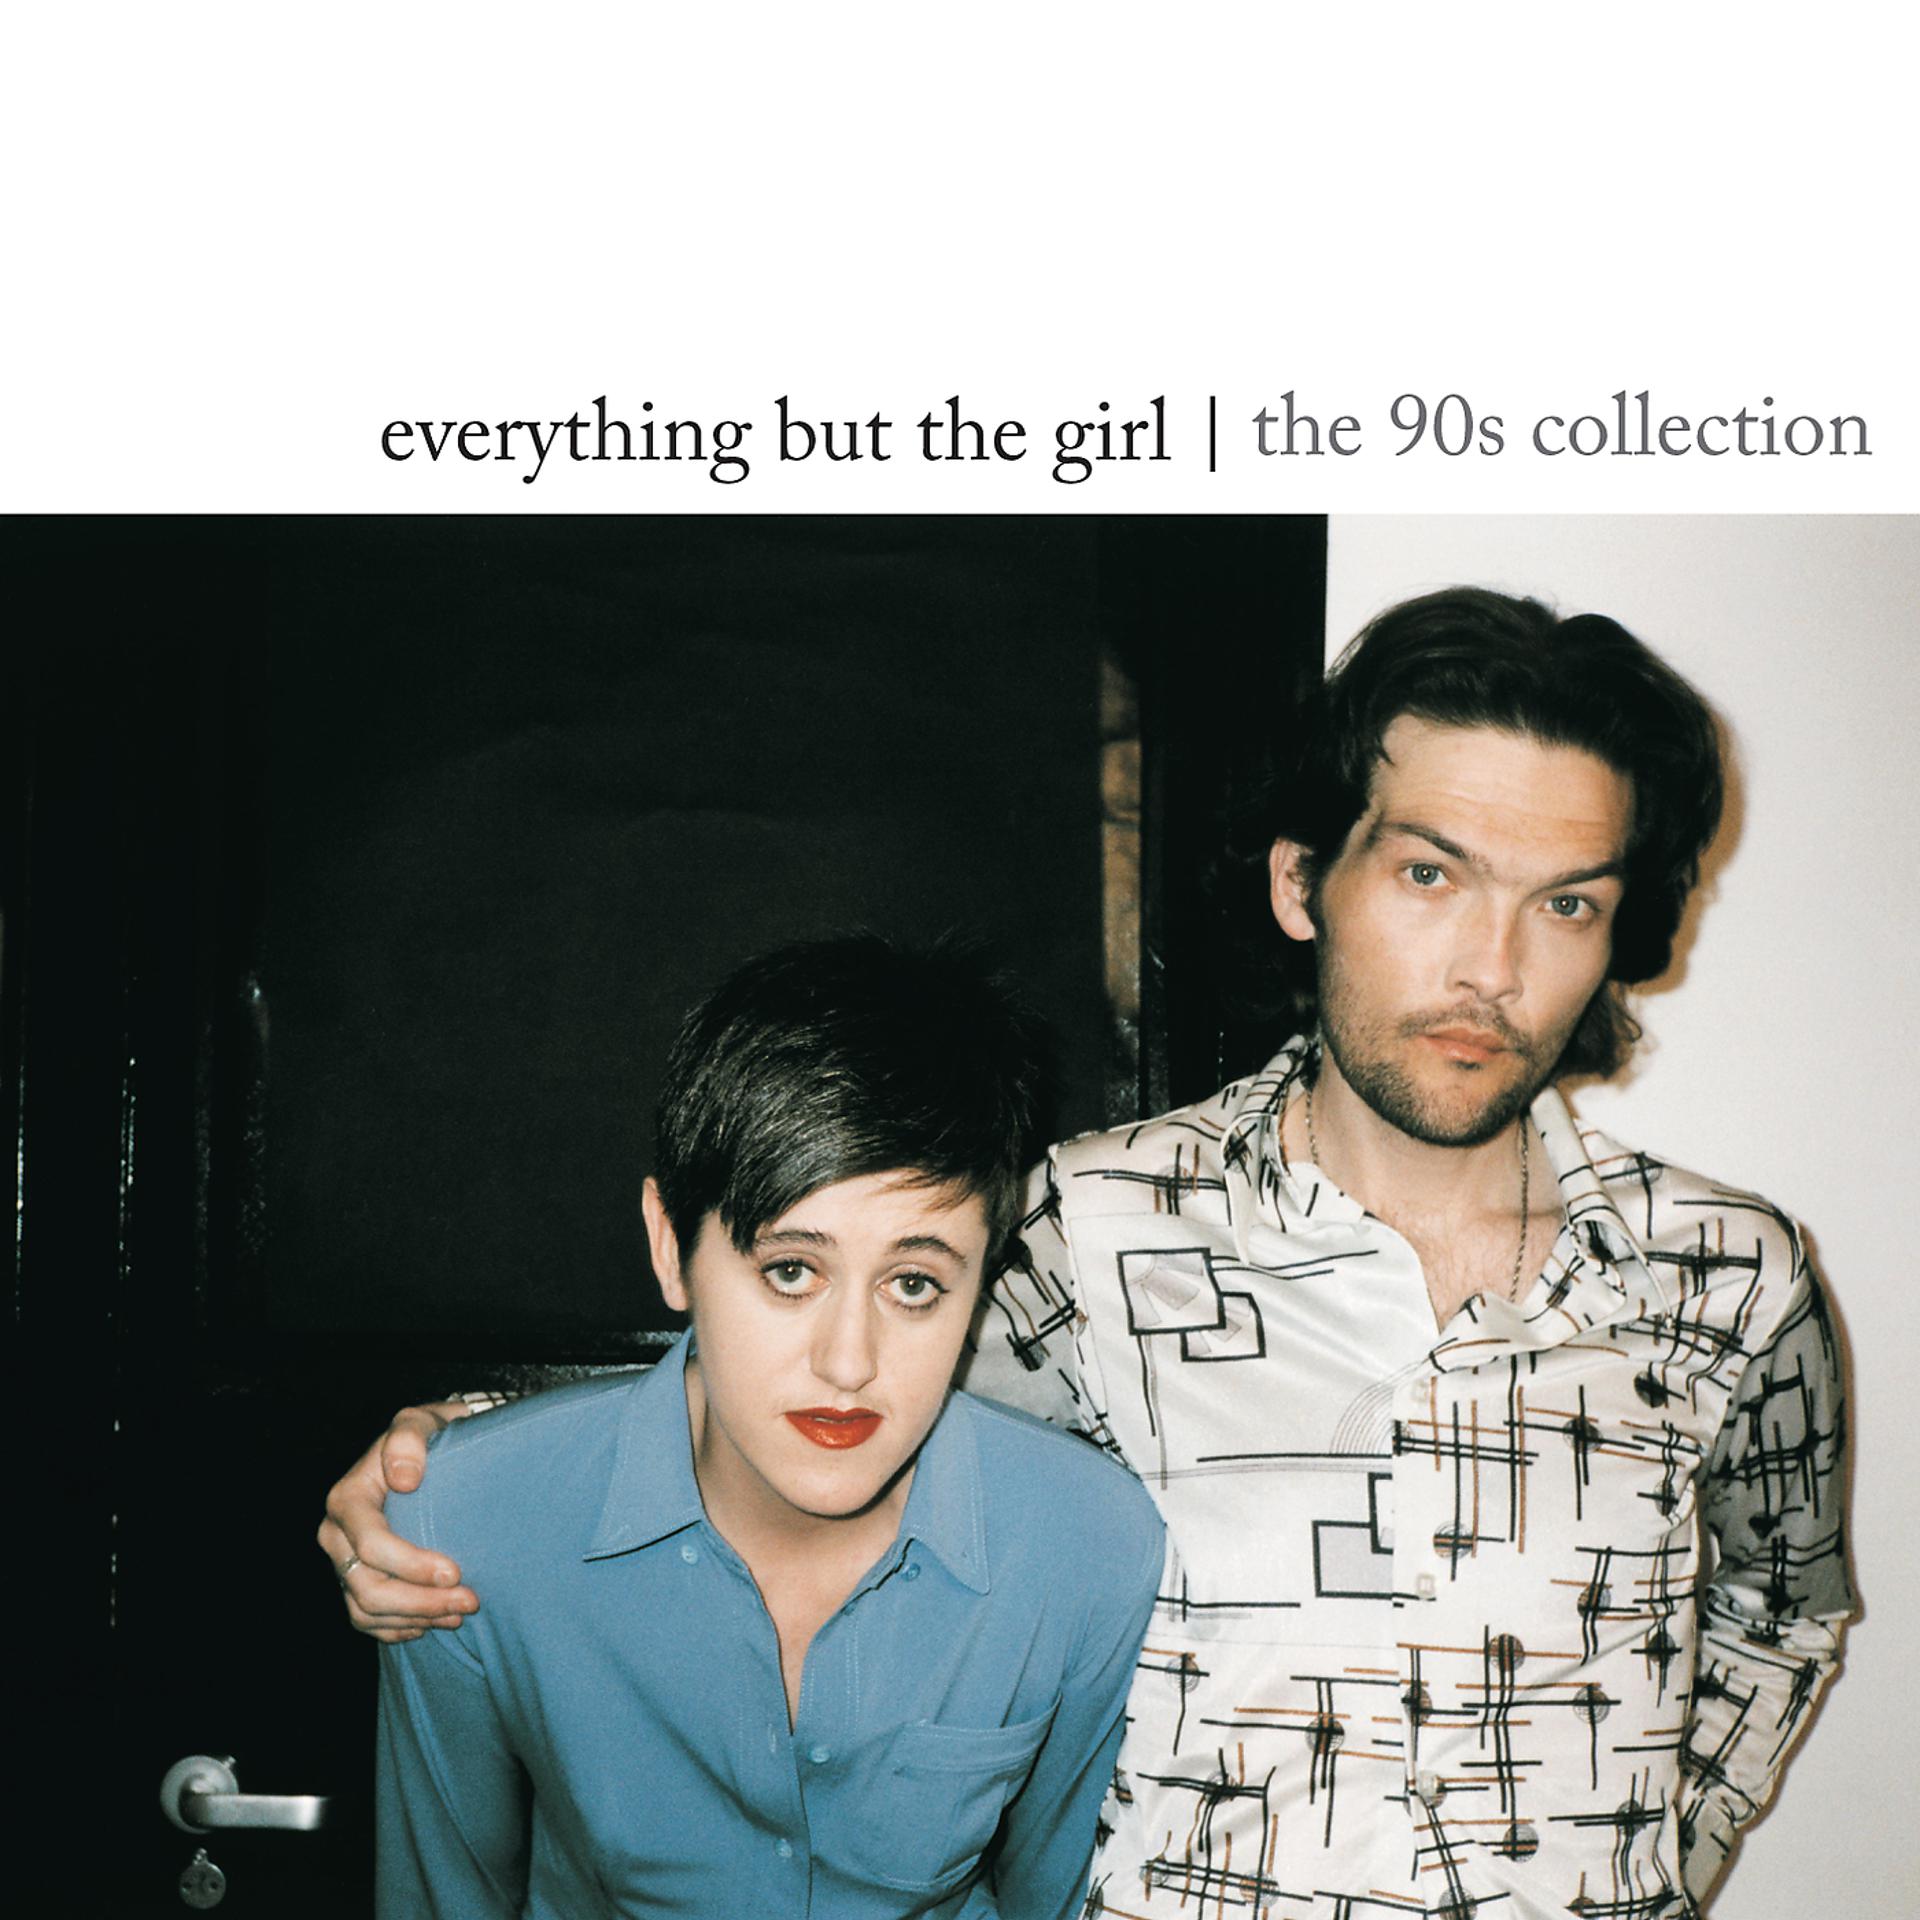 90s collection. Группа everything but the girl. Everything but the girl missing. Группа everything but the girl альбомы. Группа everything but the girl сейчас.